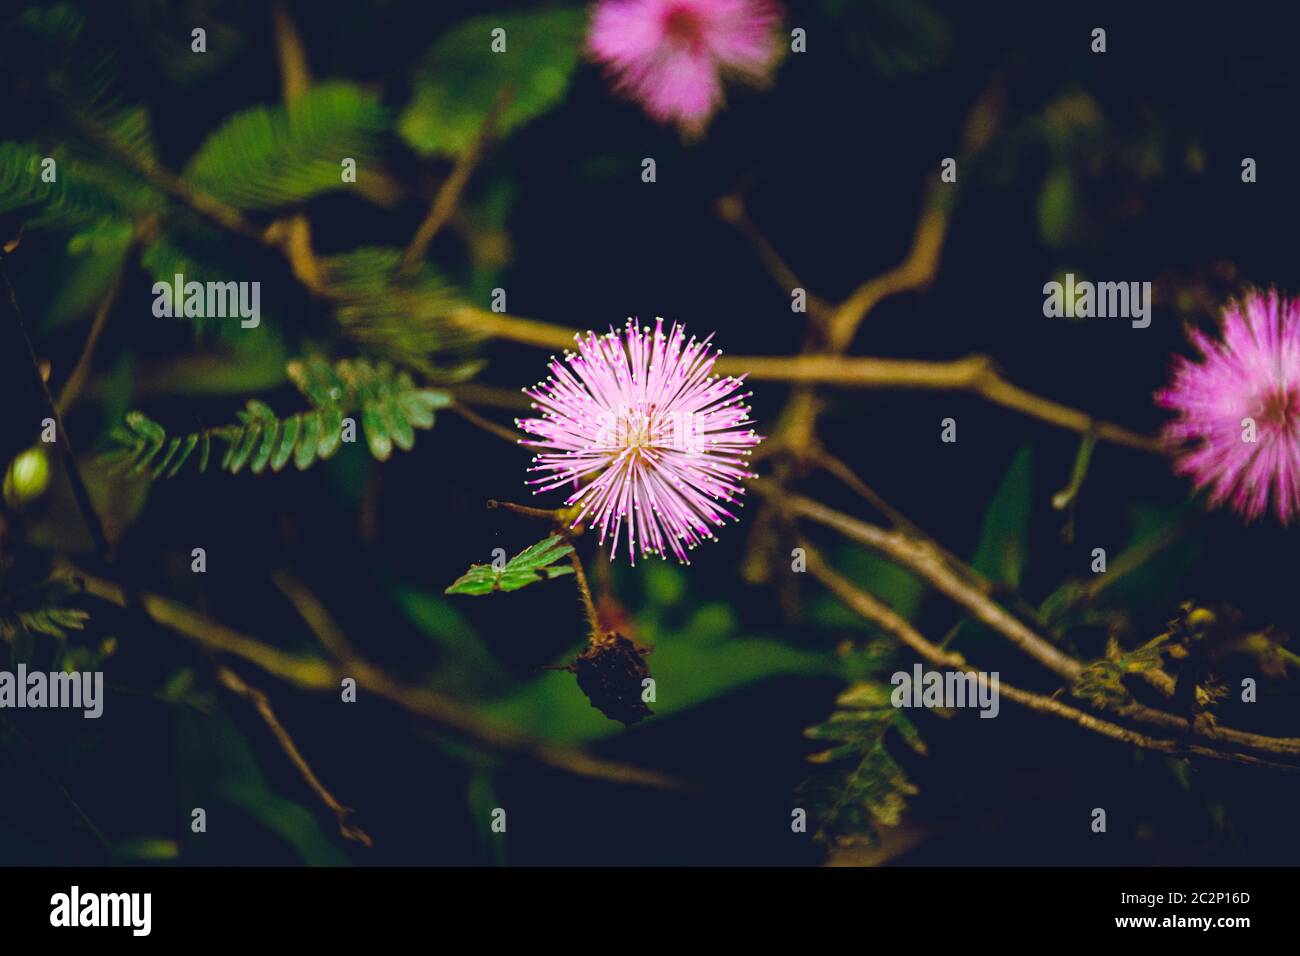 Mimosa pudica or Shameplant flower in low light to show concept of moody floral spring theme Stock Photo